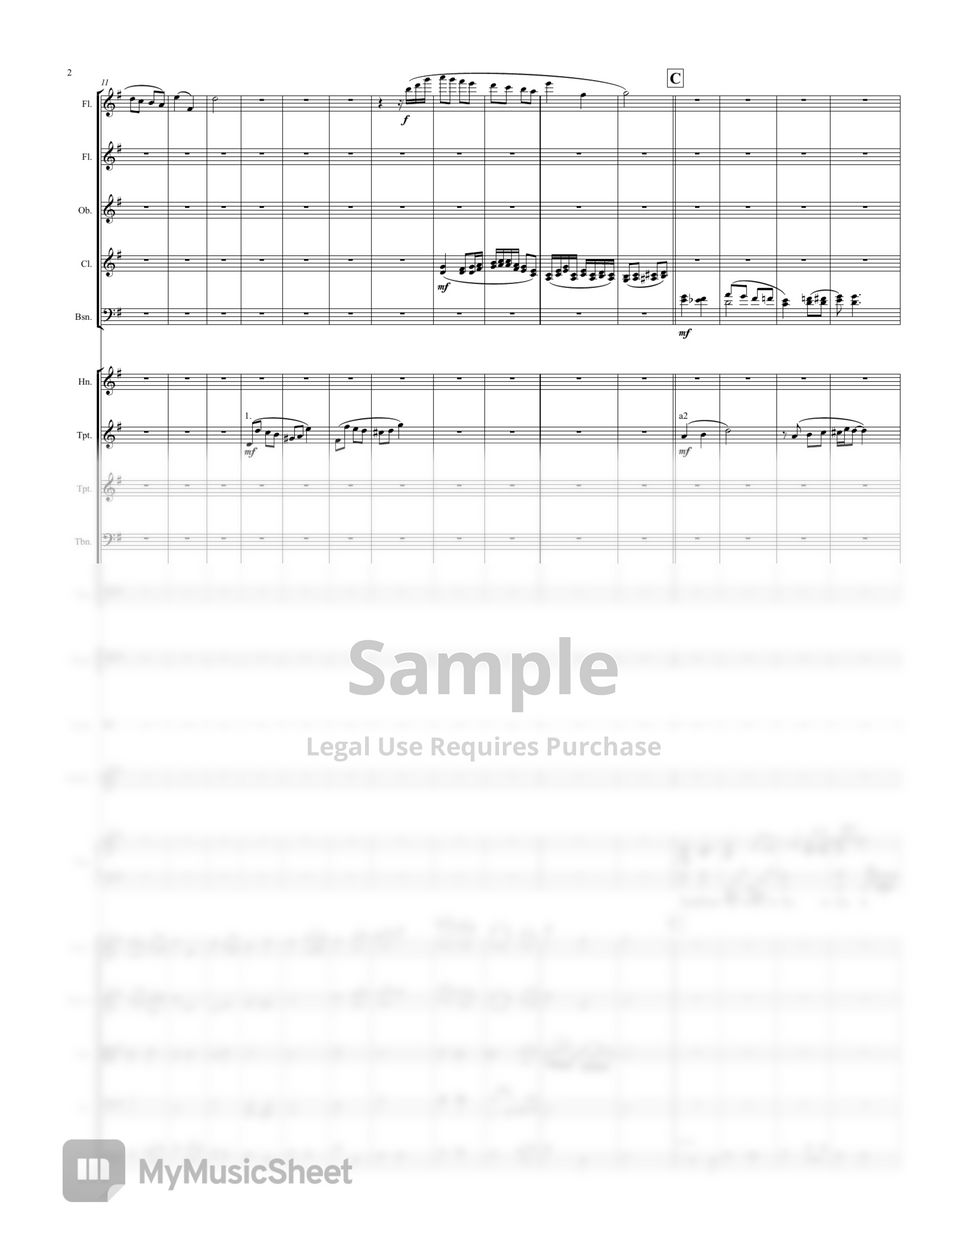 Leigh Harline - When You Wish Upon a Star for Orchestra - Score and Set of Part by Hai Mai